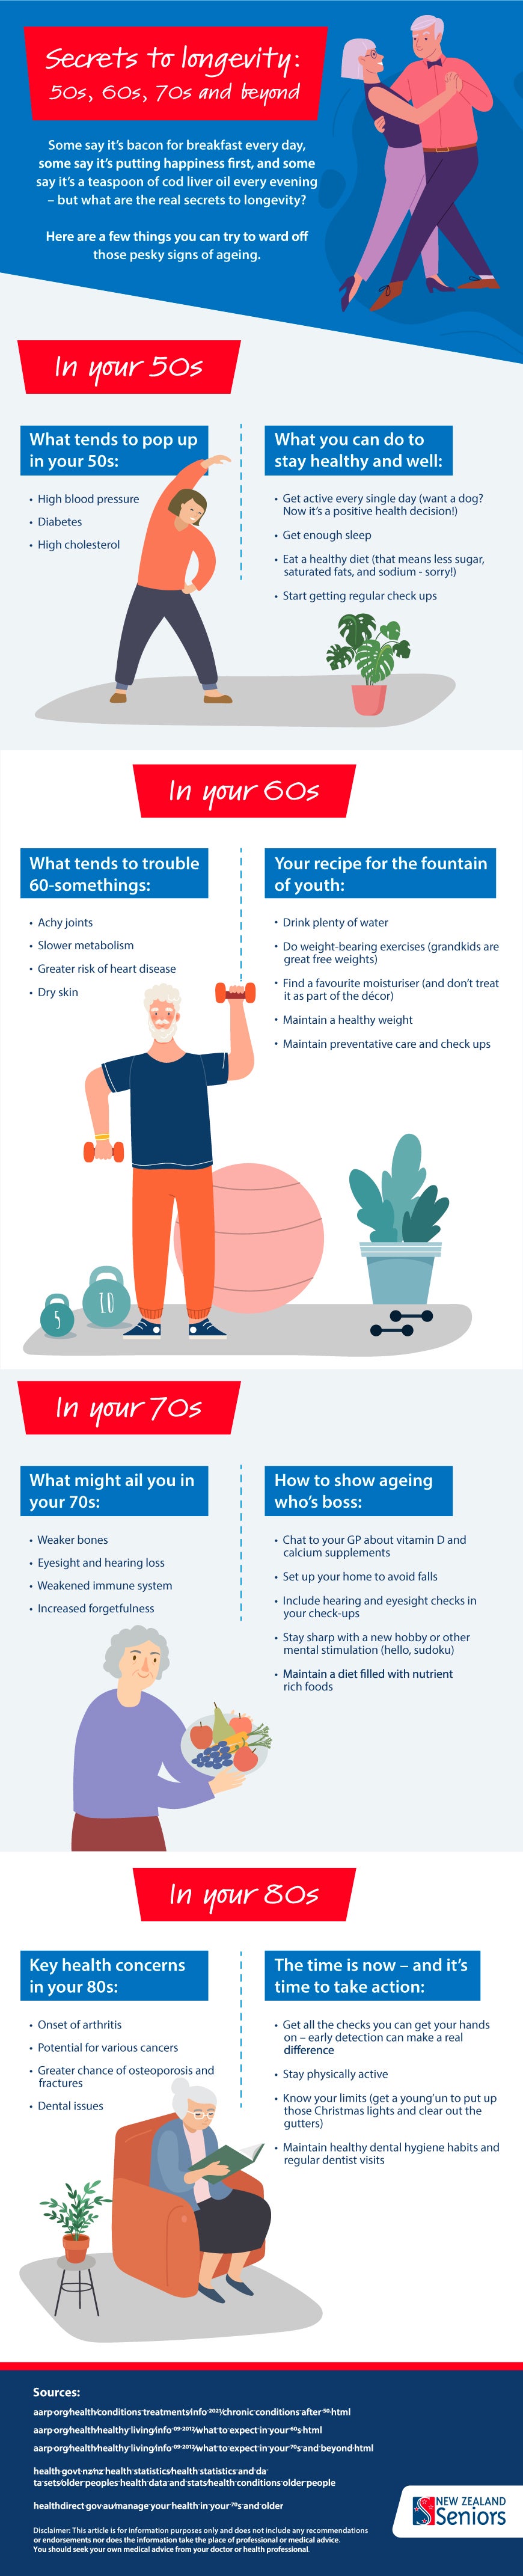 Infographic for longevity as you age in your 50s, 60s, 70s